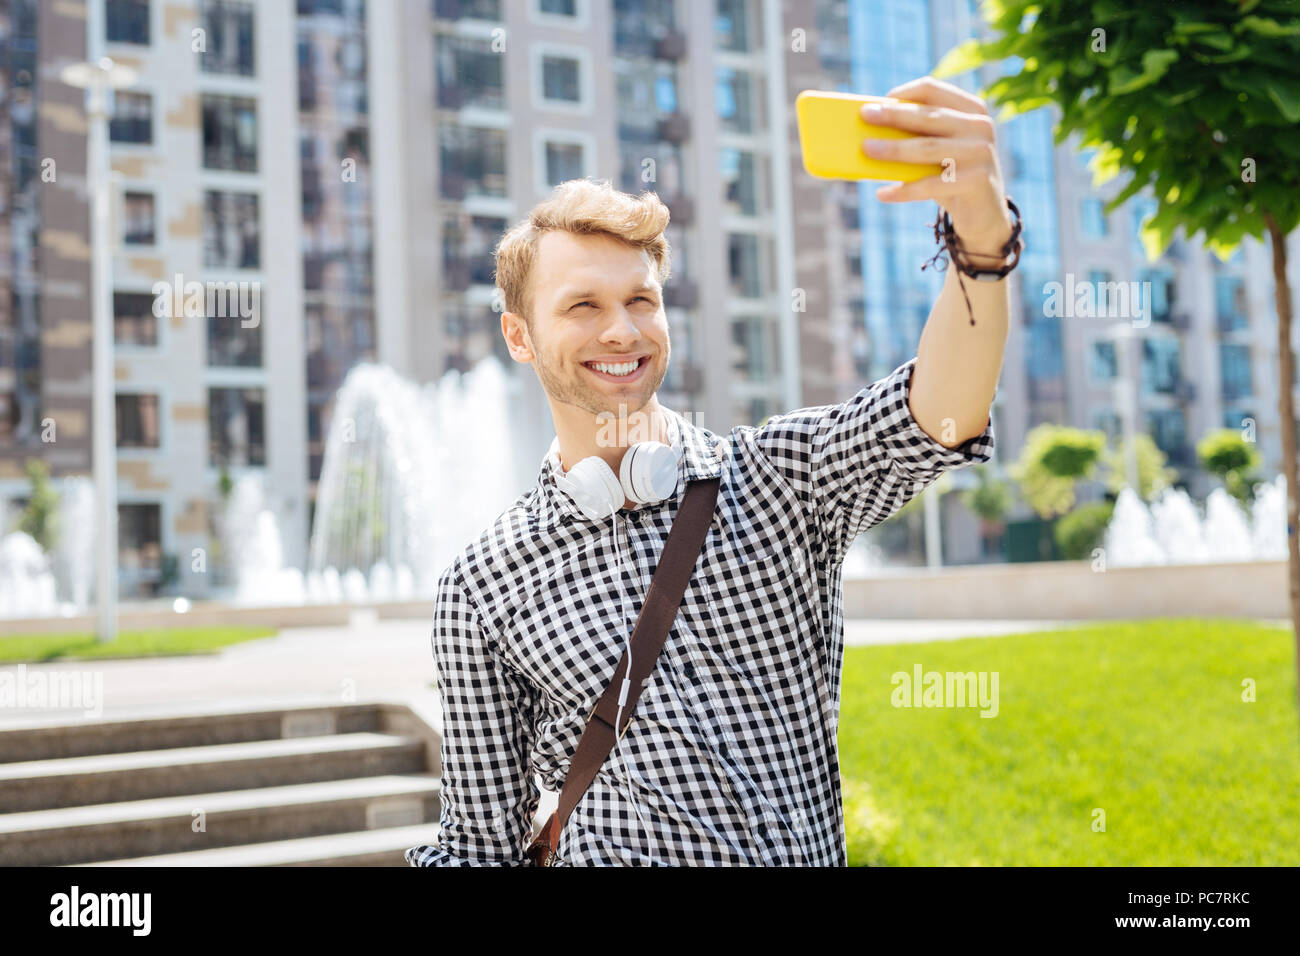 Delighted cheerful man smiling into the camera Stock Photo